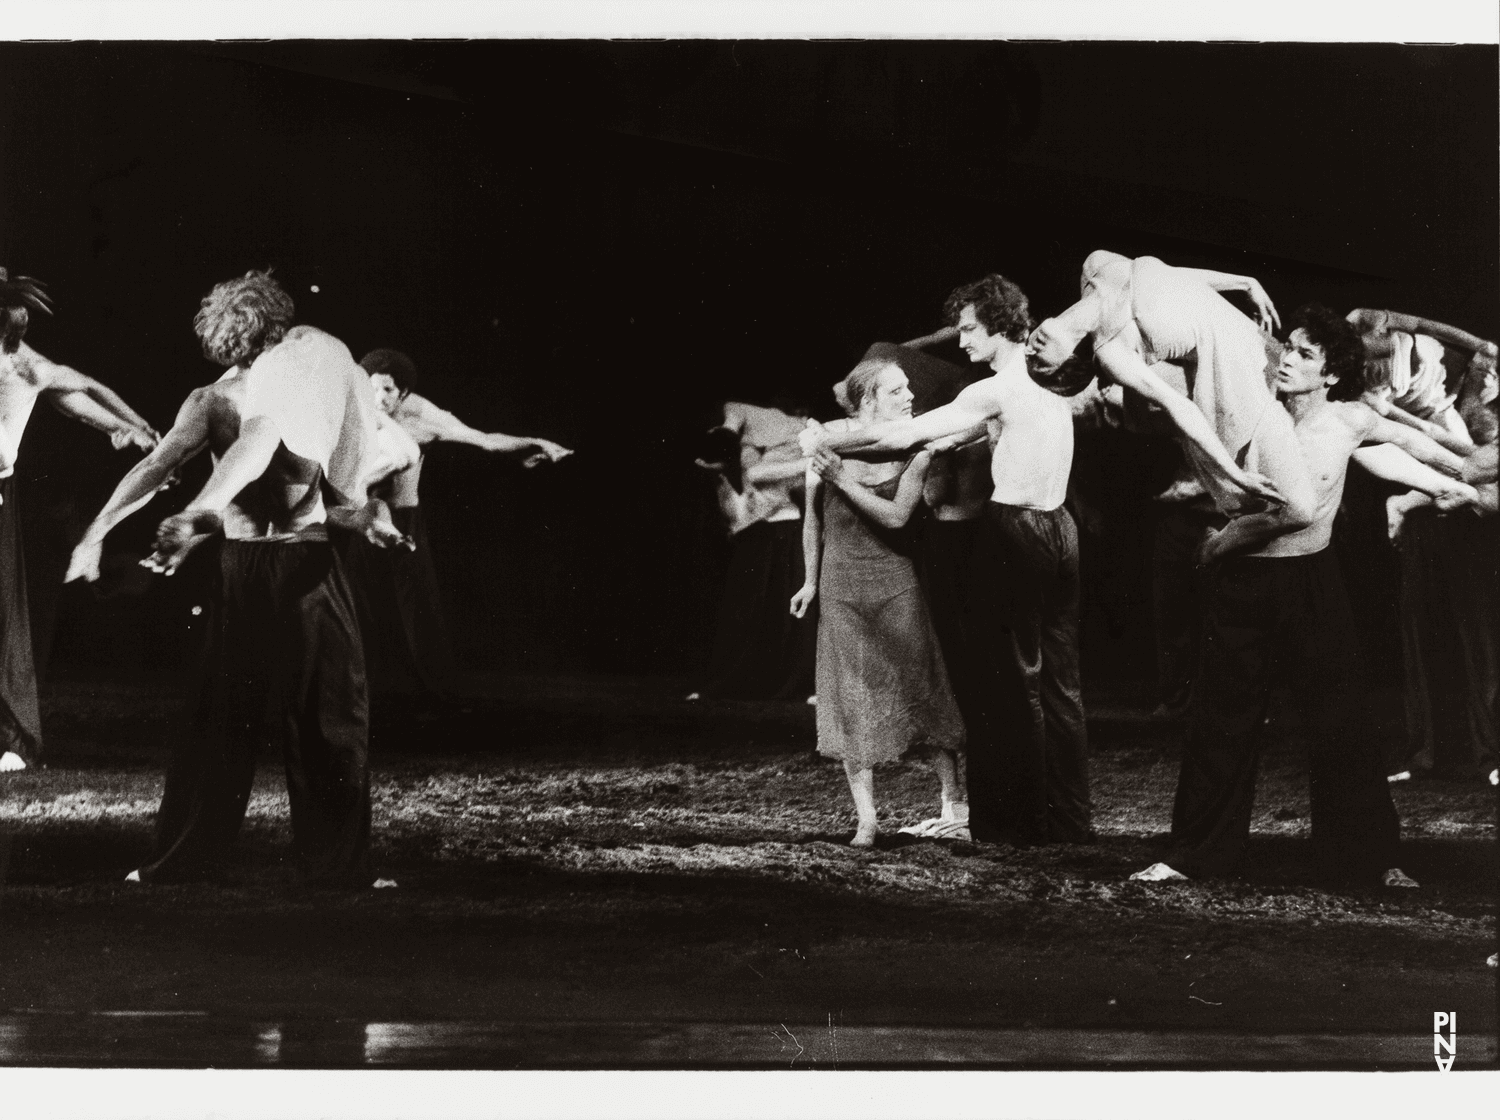 “The Rite of Spring” by Pina Bausch